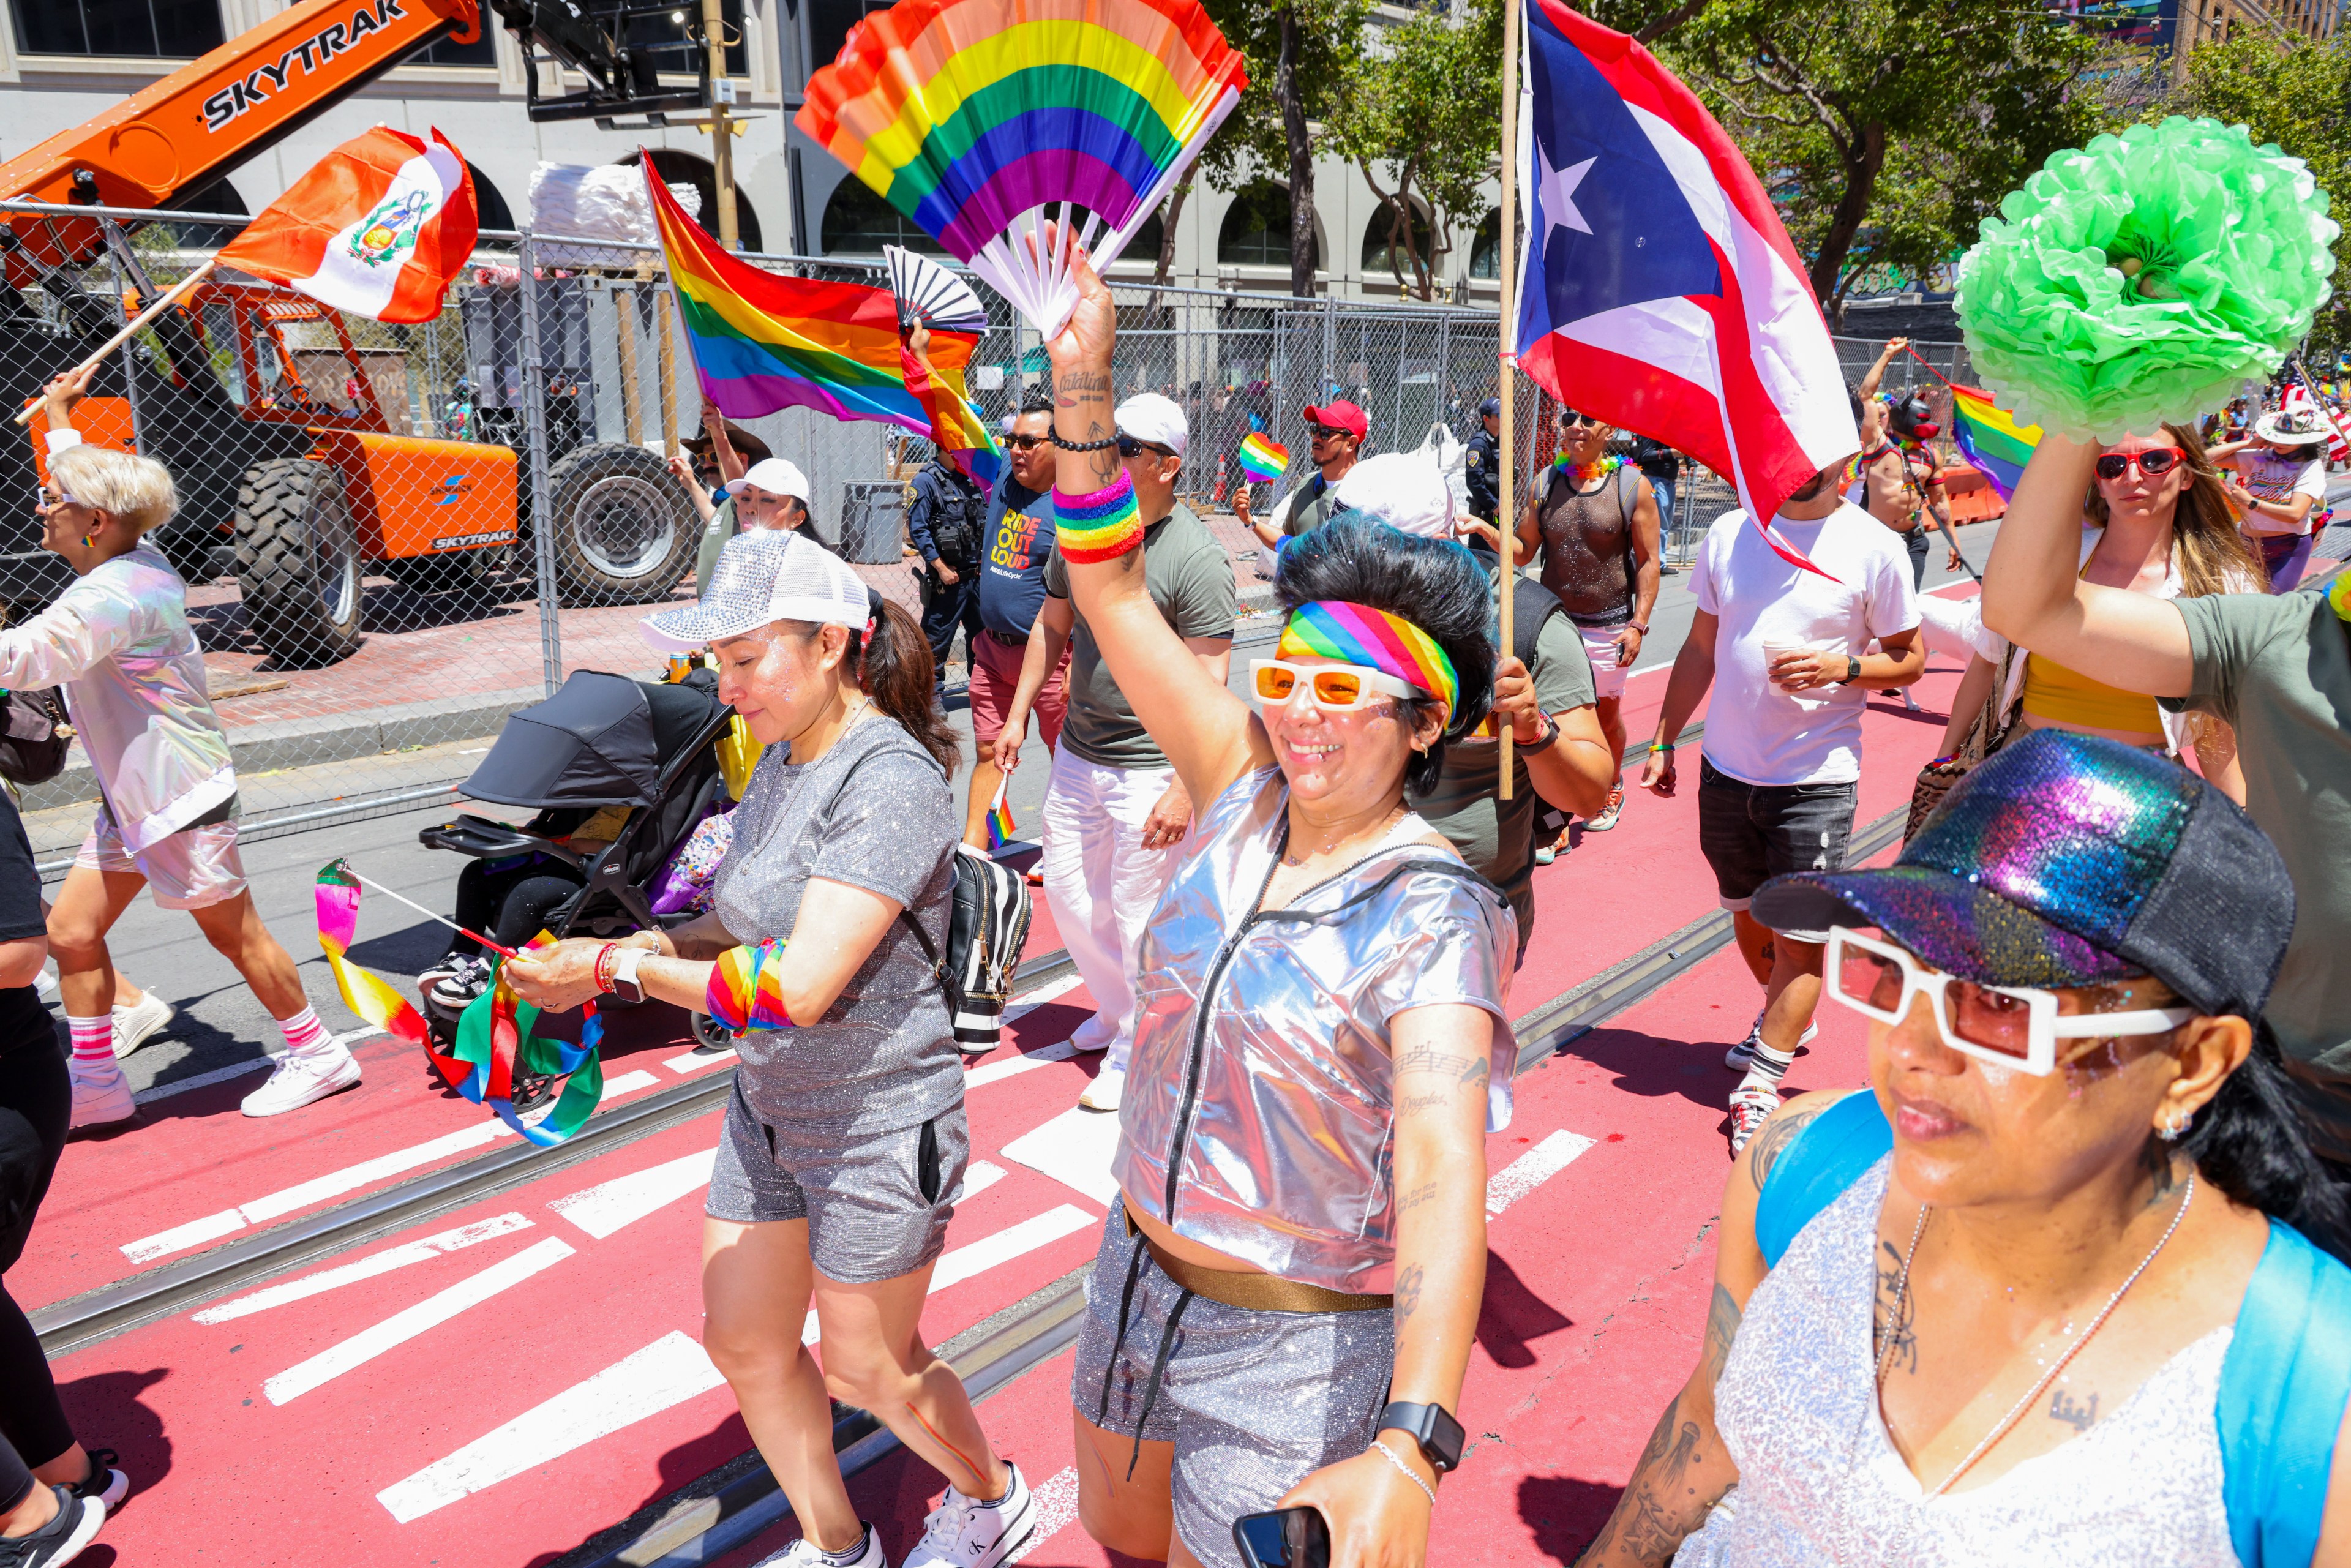 People in colorful outfits are joyfully participating in a Pride parade, waving rainbow flags and banners, on a brightly sunlit street.